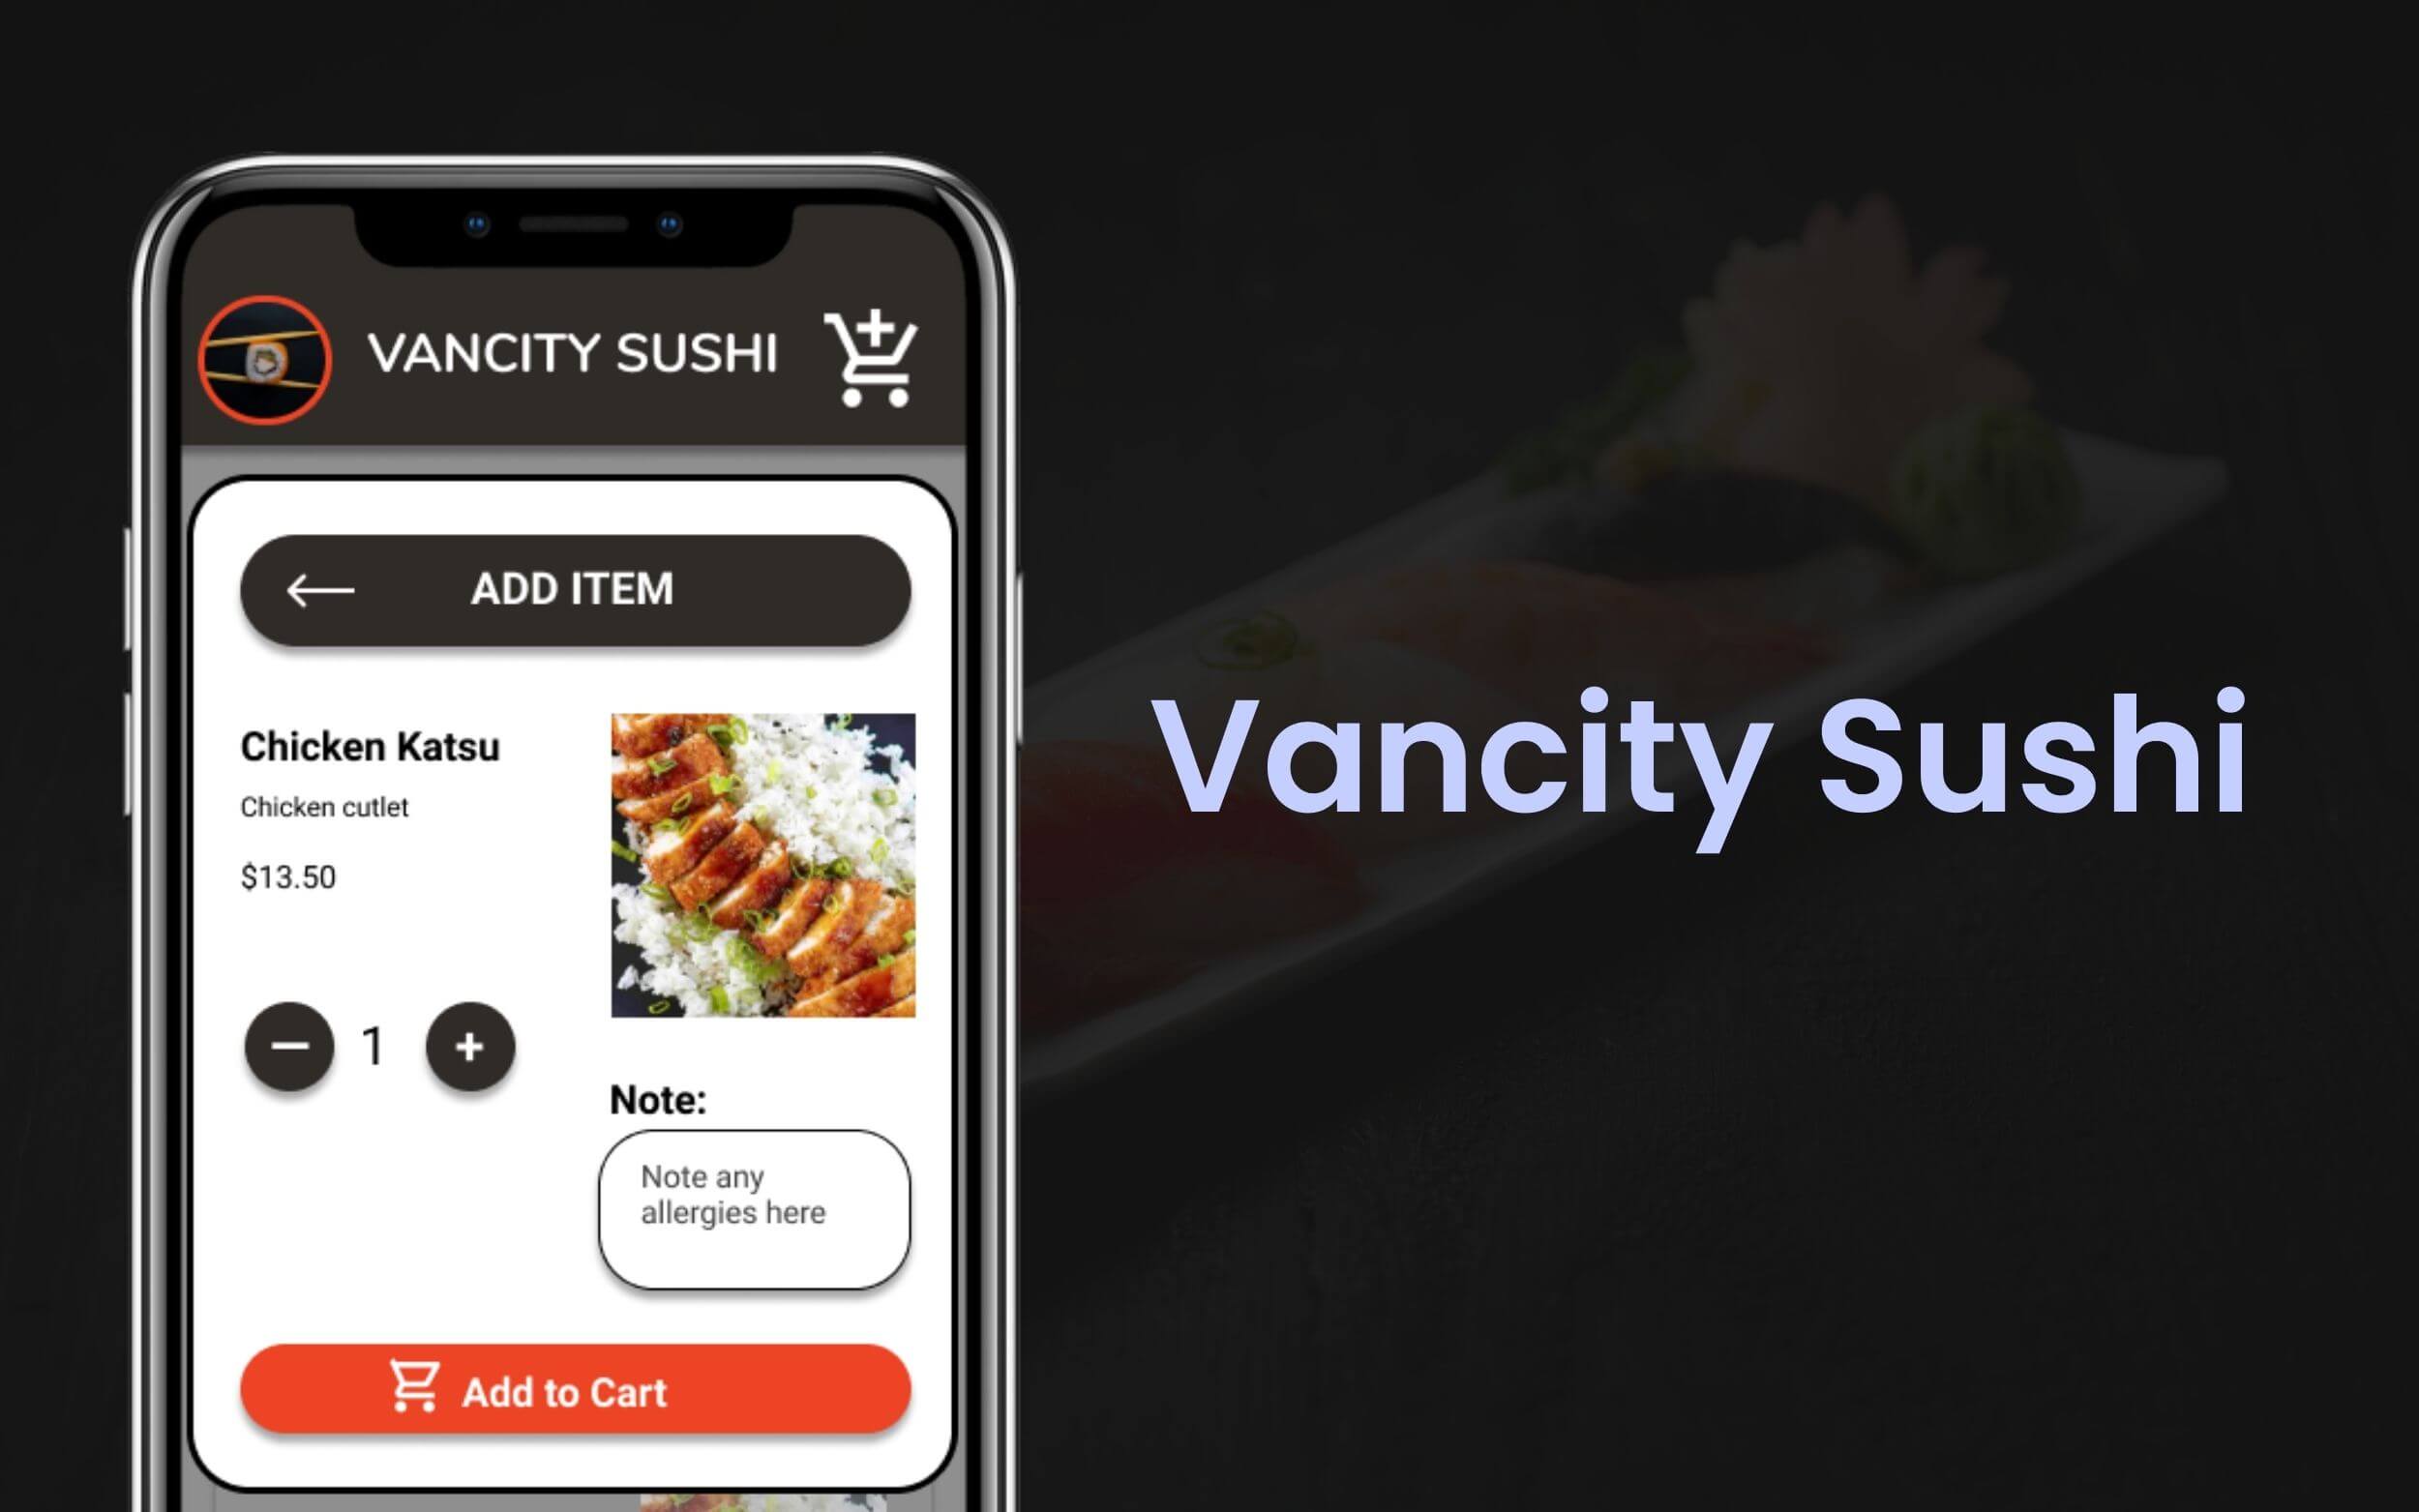 Cover Photo of Vancity Sushi Ordering Mobile Application screenshot of Chicken Katsu next to Vancity Sushi text on top of a dim background.